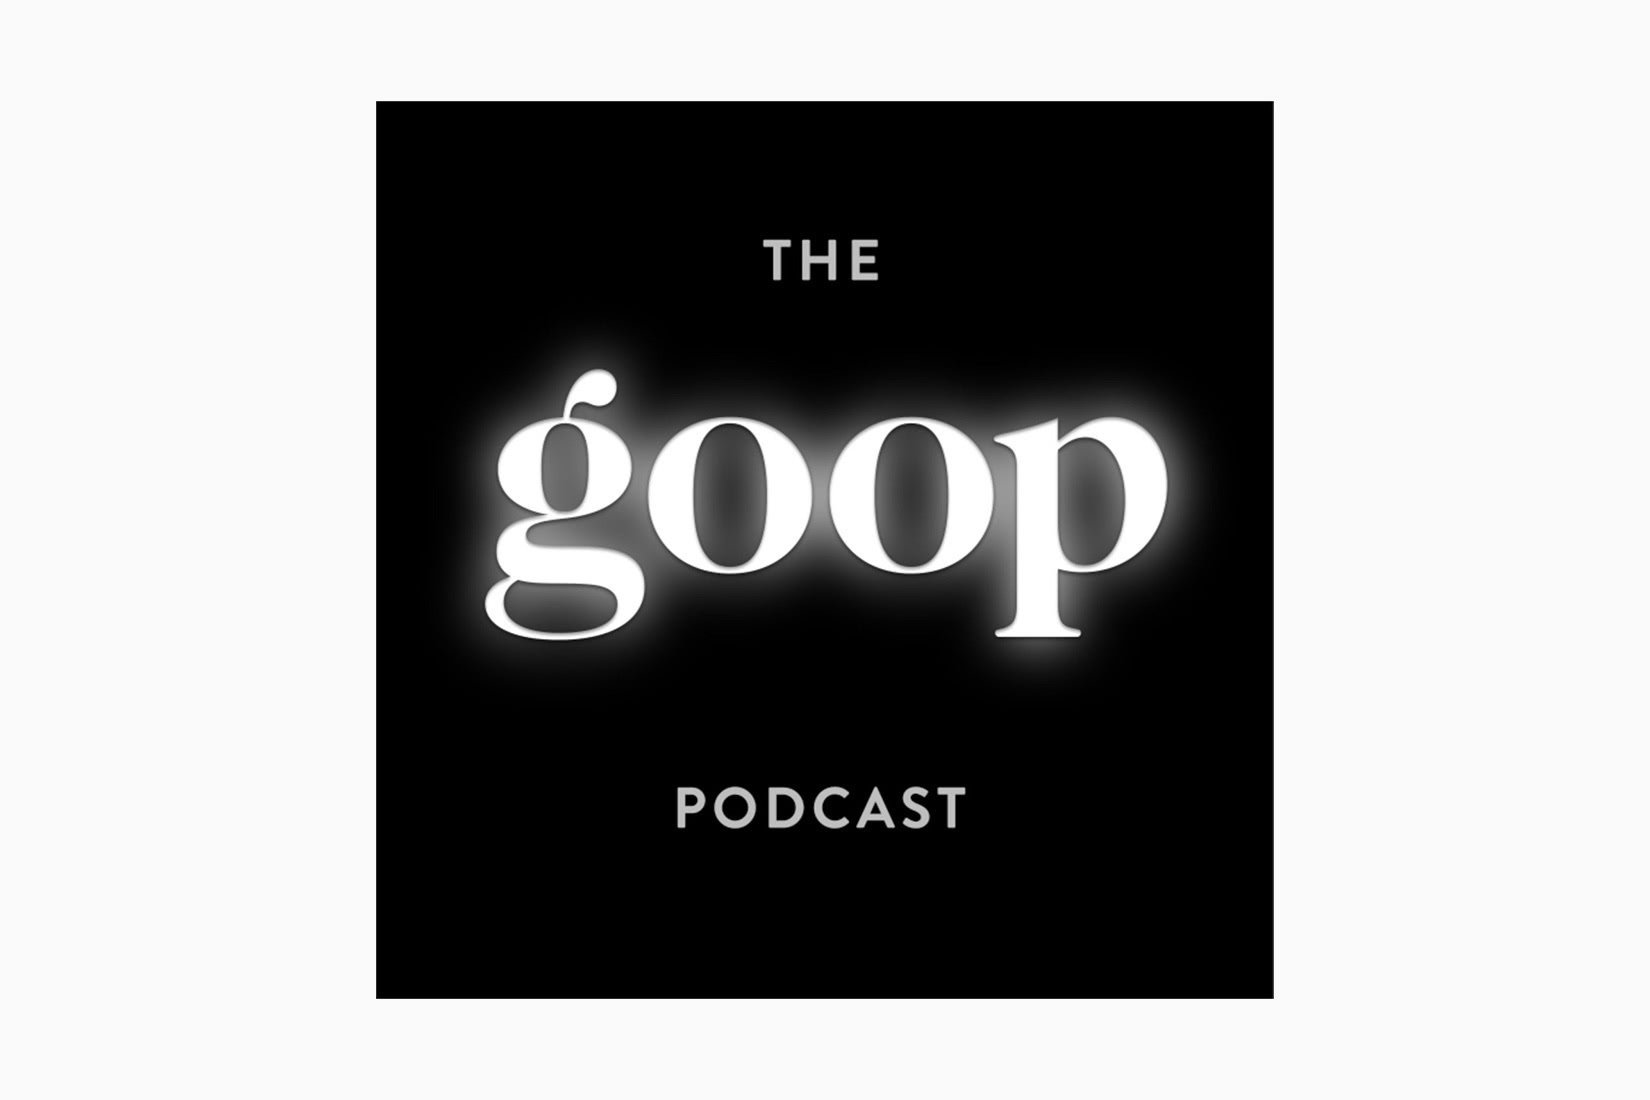 meilleurs podcasts le podcast goop luxe digital